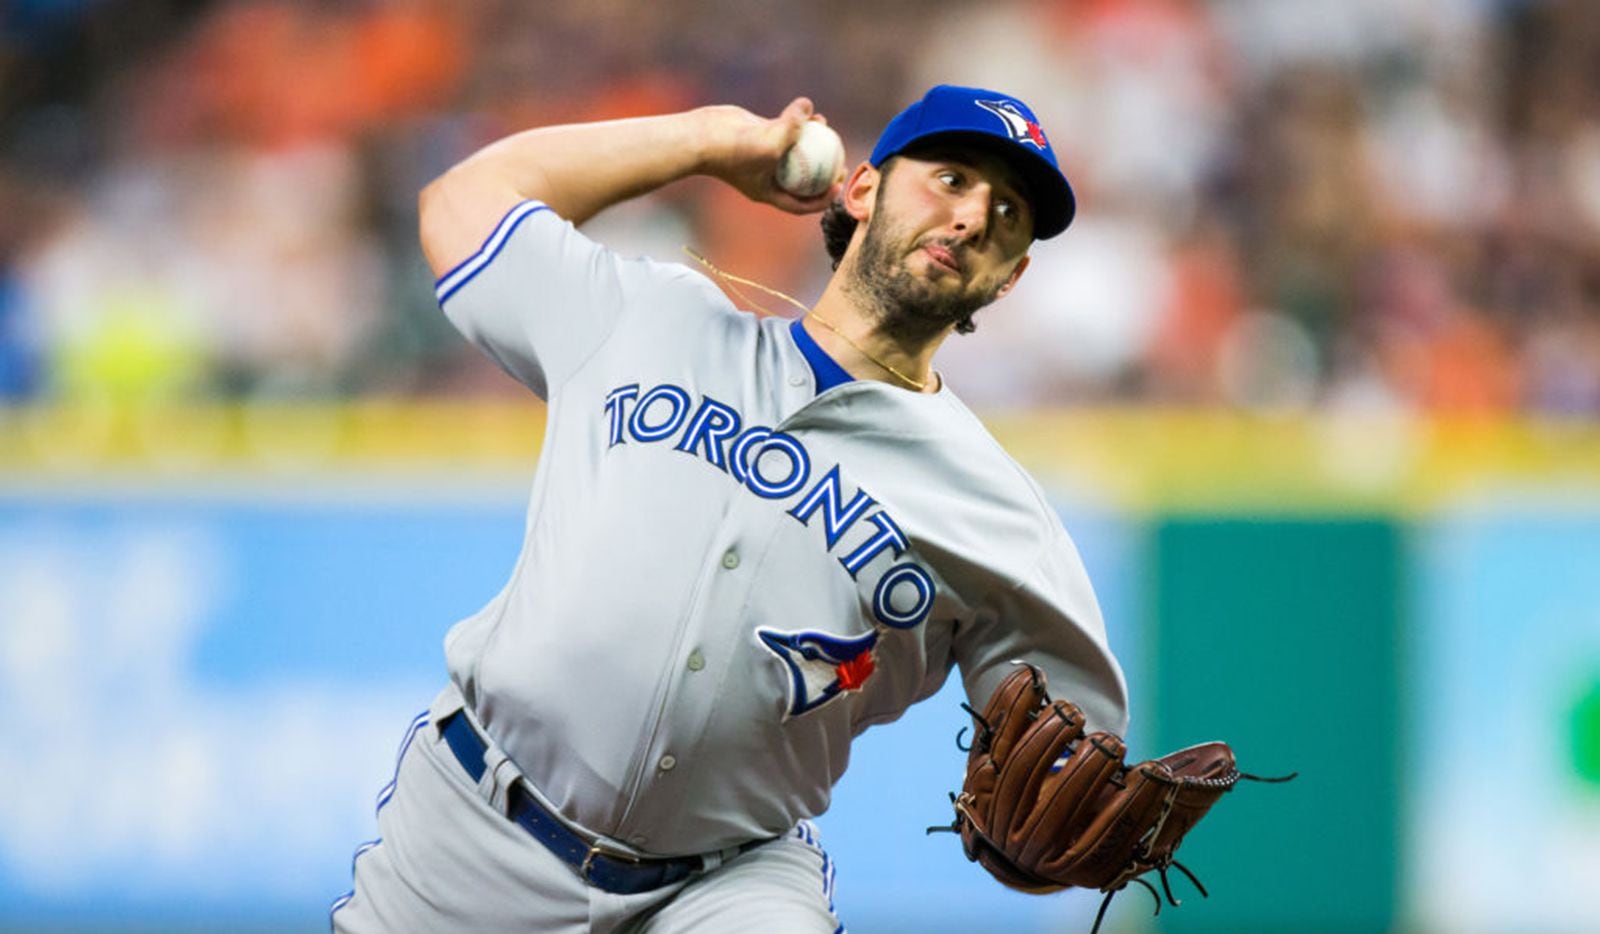 Toronto Blue Jays starting pitcher Mike Bolsinger (49) delivers the pitch in the fourth...